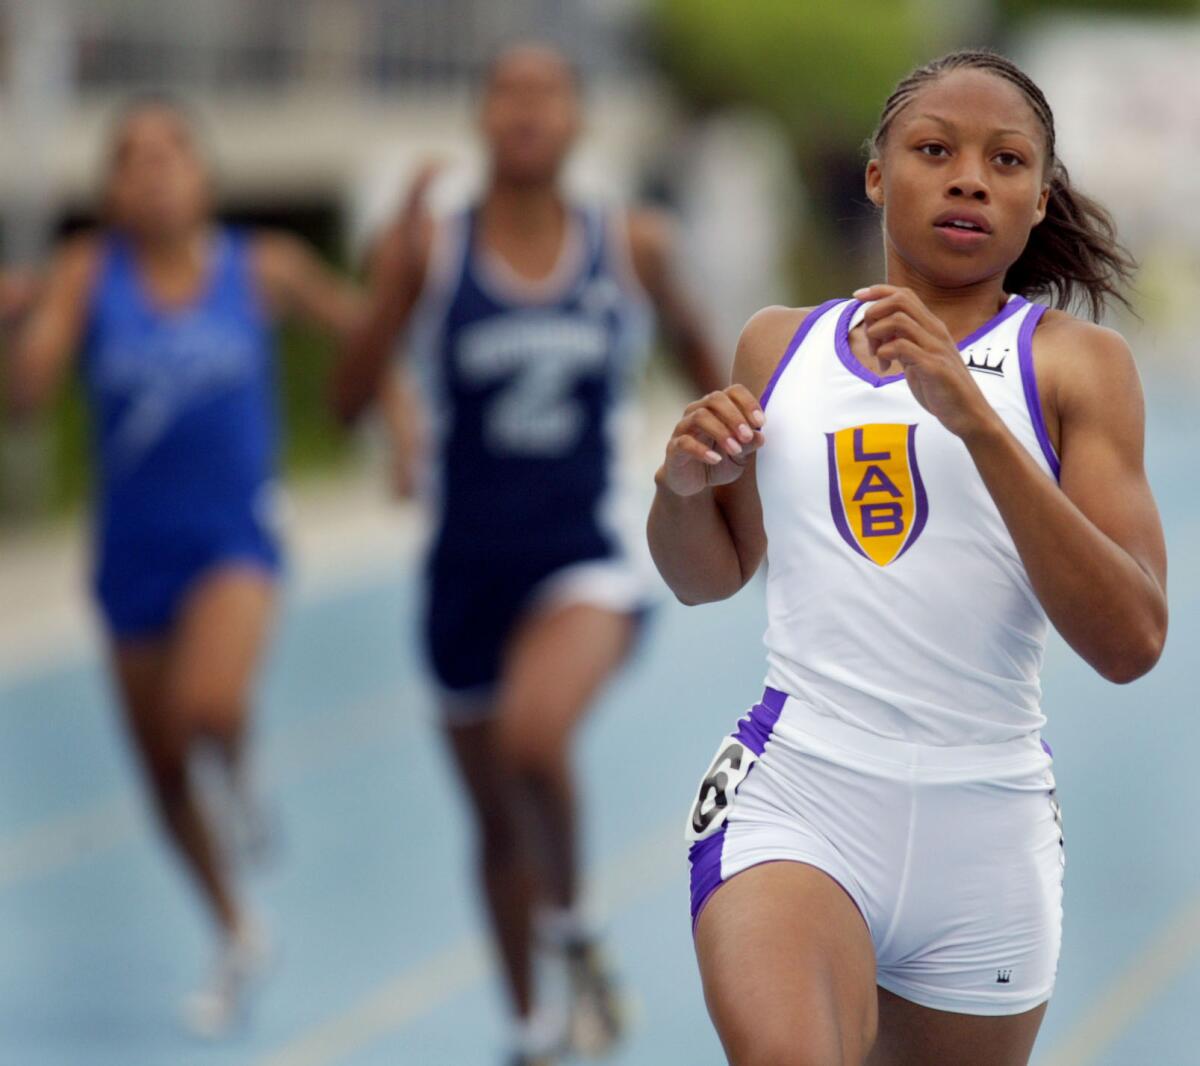 L.A. Baptist runner Allyson Felix wins the girls' 200 meters during the Southern Section championships.